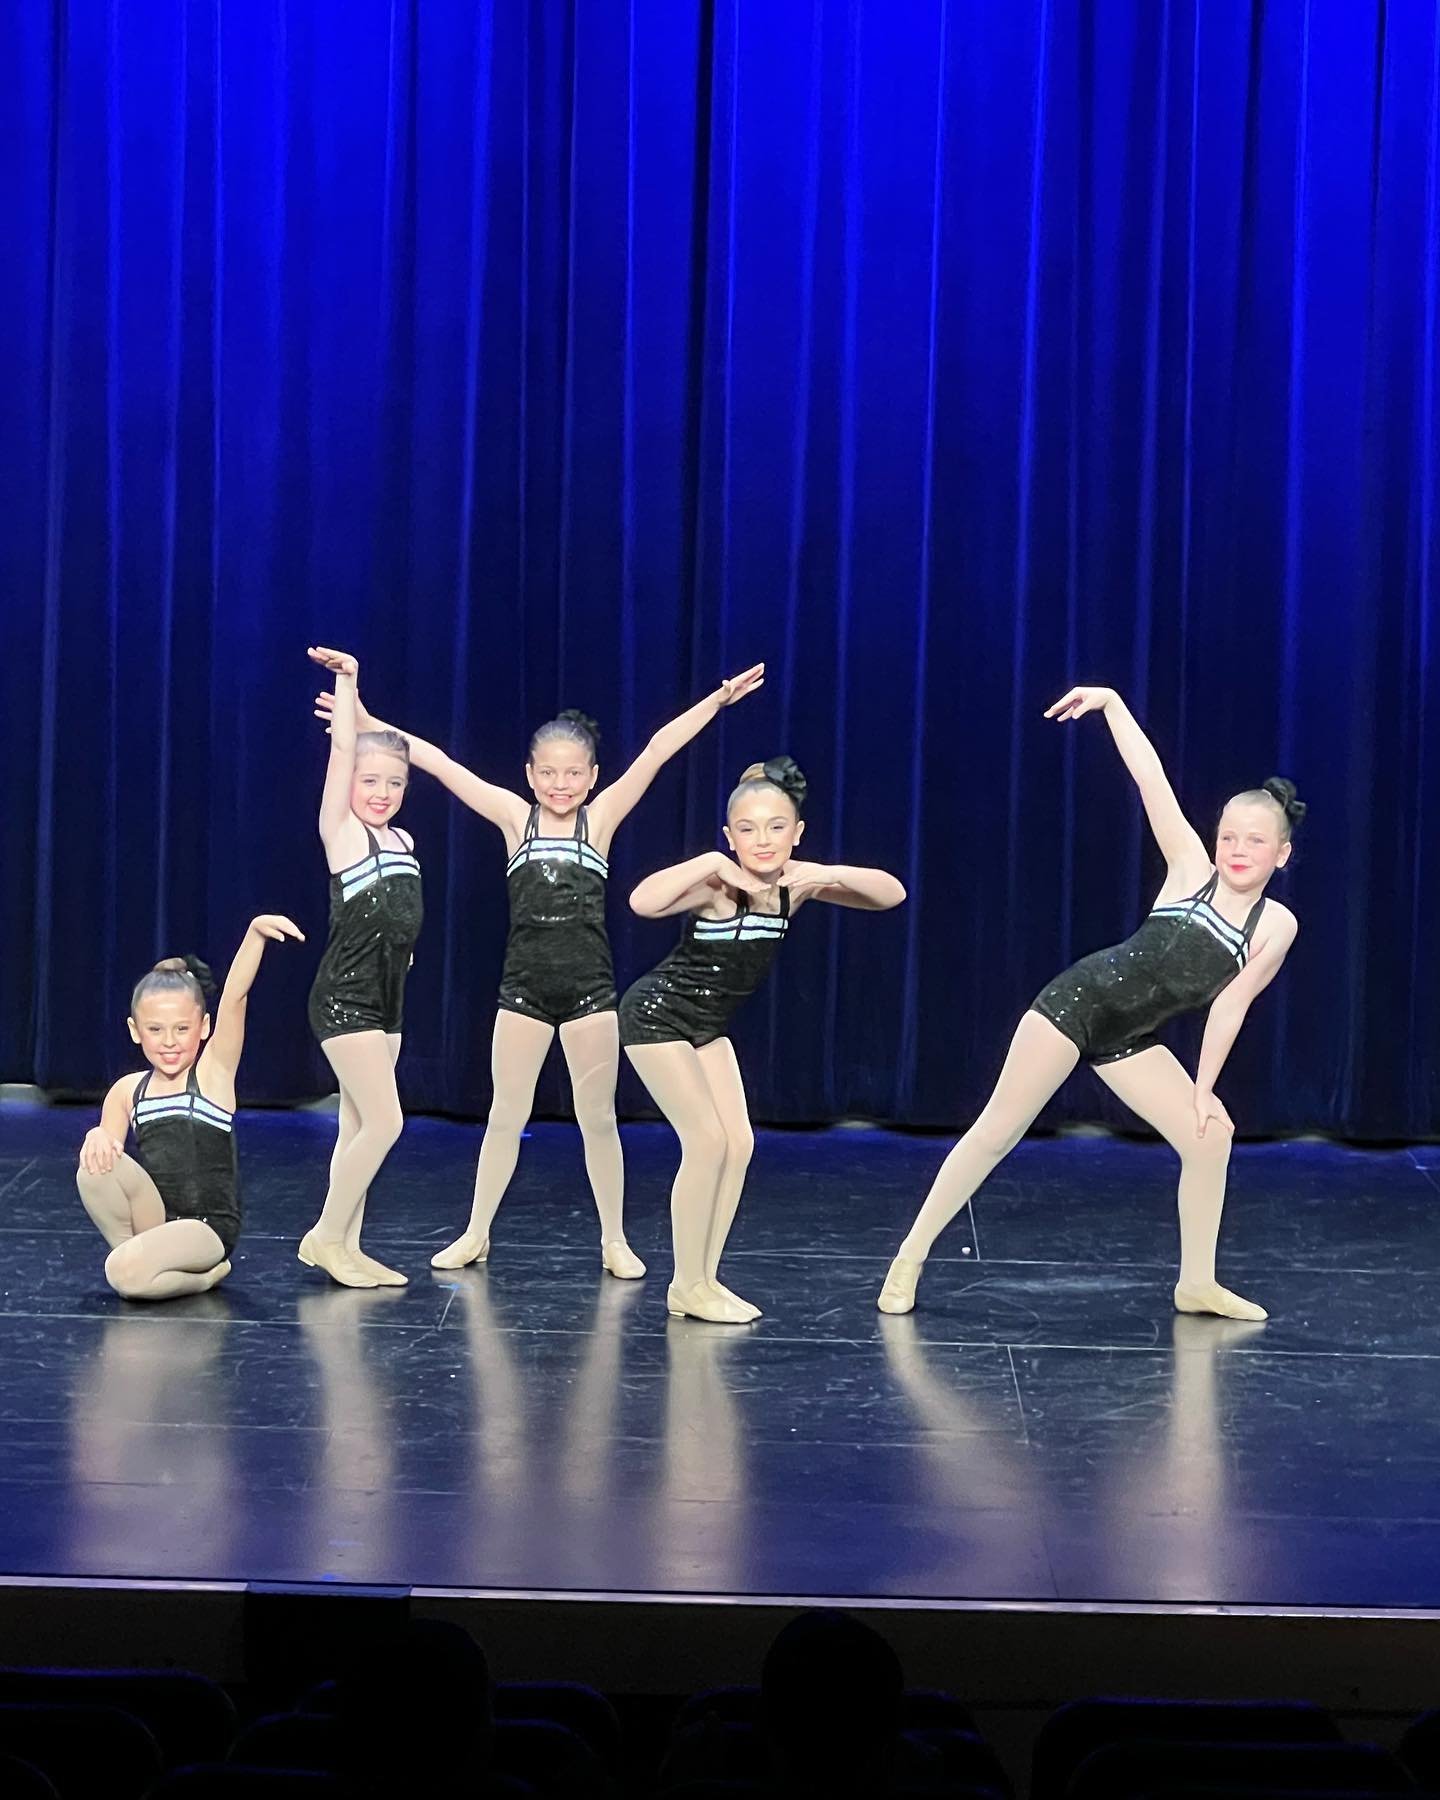 Our dress rehearsal is over and we anticipate the main event tomorrow Sunday May 12 at 1:00pm and 4:00pm. THIS IS US at the Wolf Performance Hall. There will be tickets at the door. This is our last show as we close our doors. #dancestepsldn #dance #